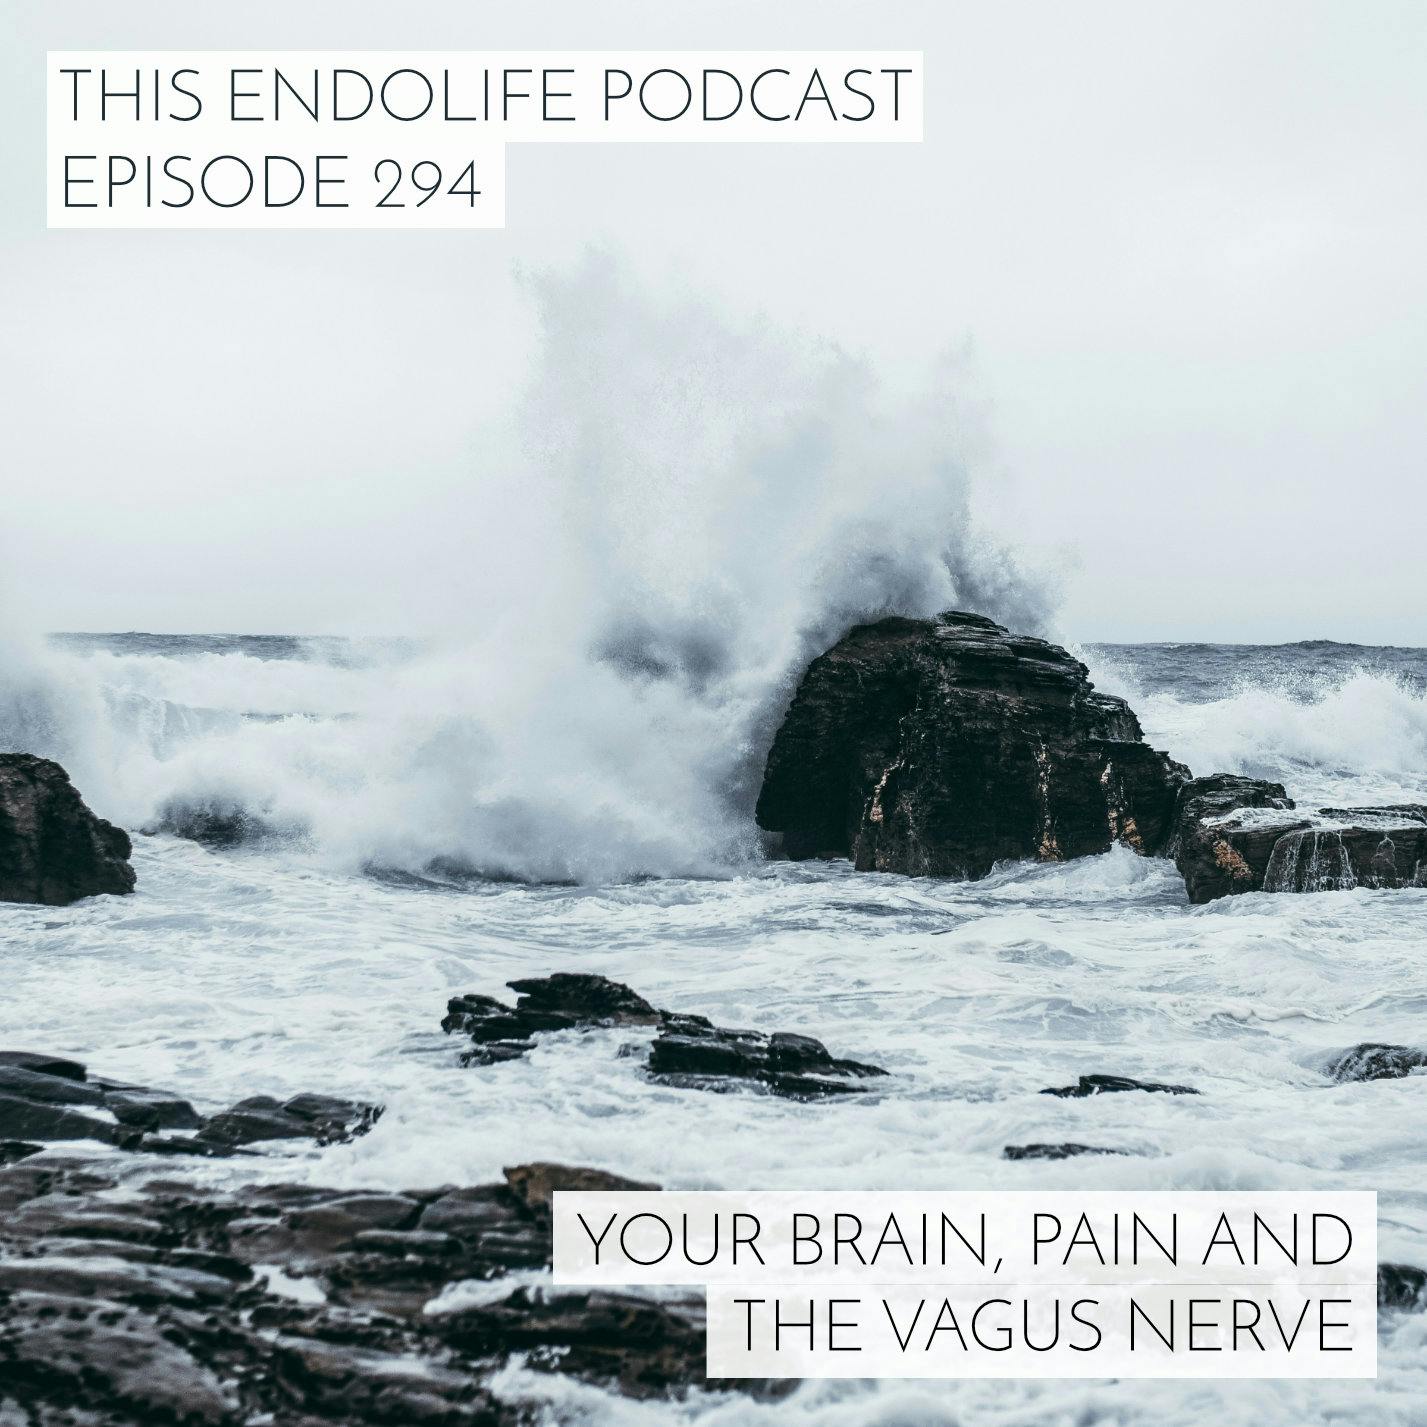 Your Brain, Pain and the Vagus Nerve